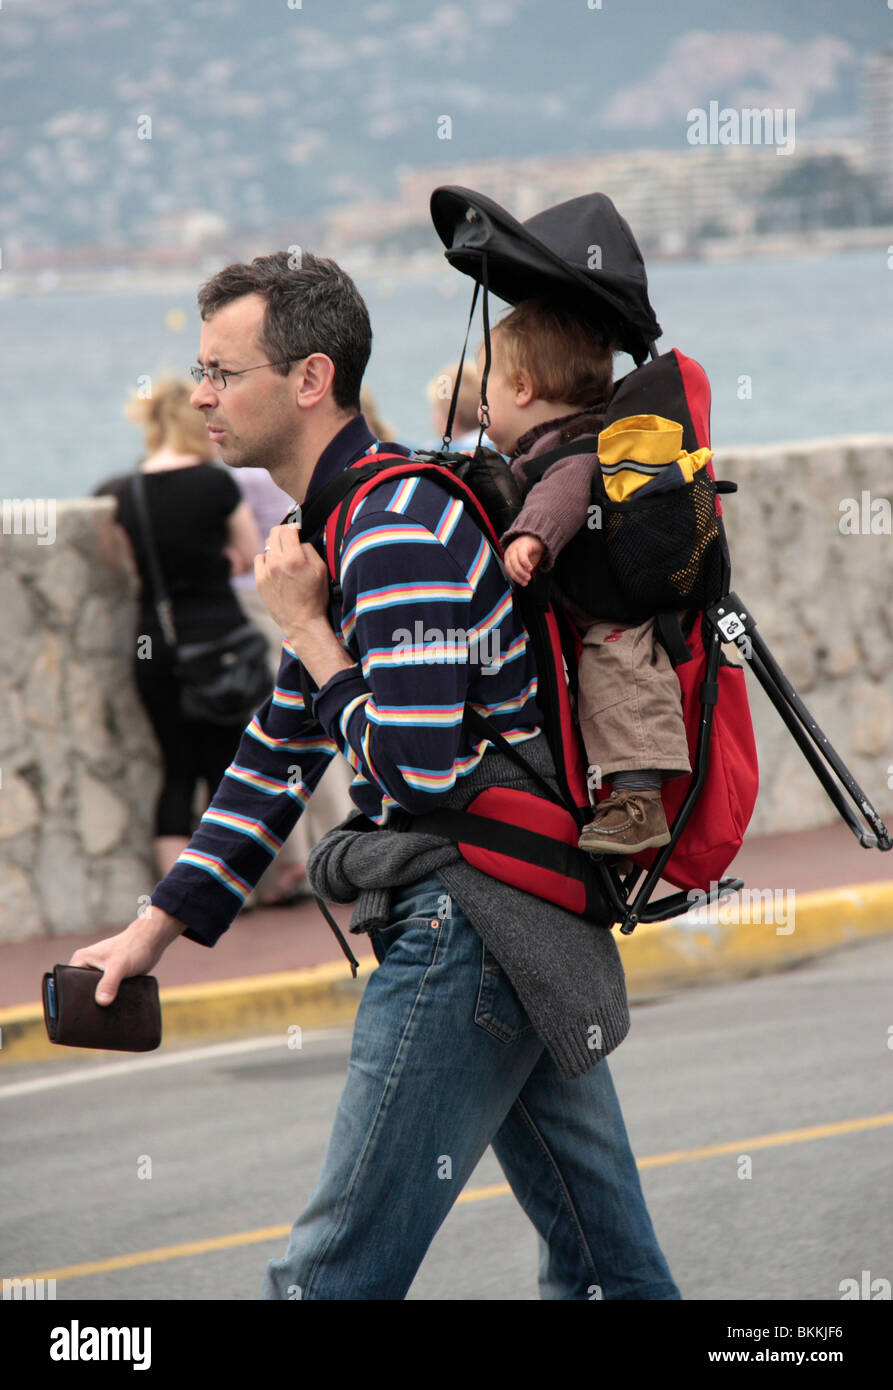 travel baby backpack carrier